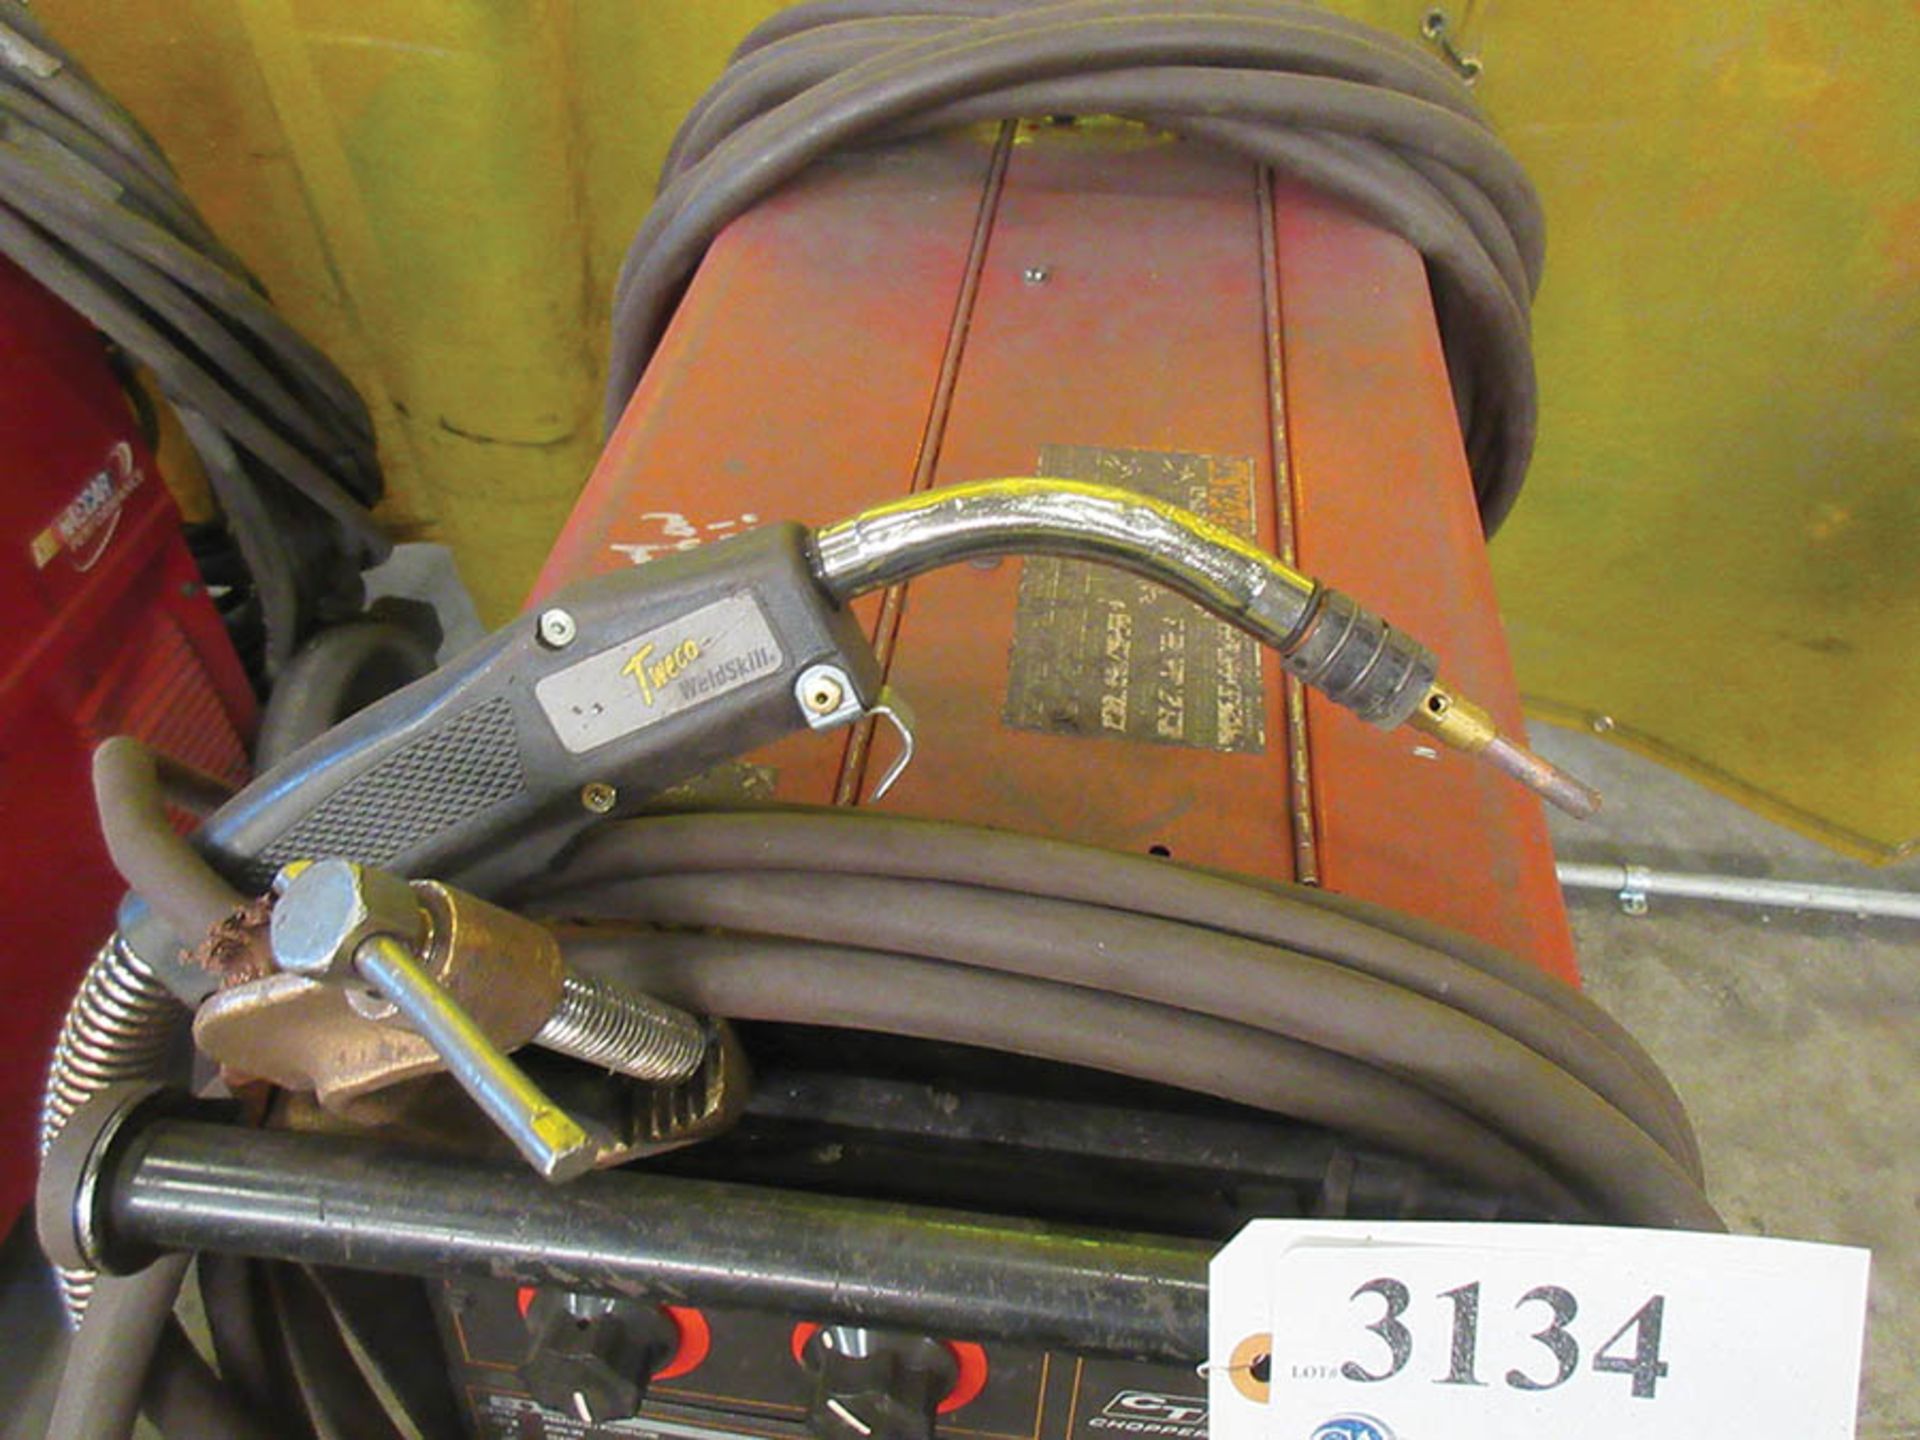 LINCOLN ELECTRIC 350MP POWER MIG WELDER WITH TWECO WELDSKILL MIG GUN, #57 - Image 3 of 3